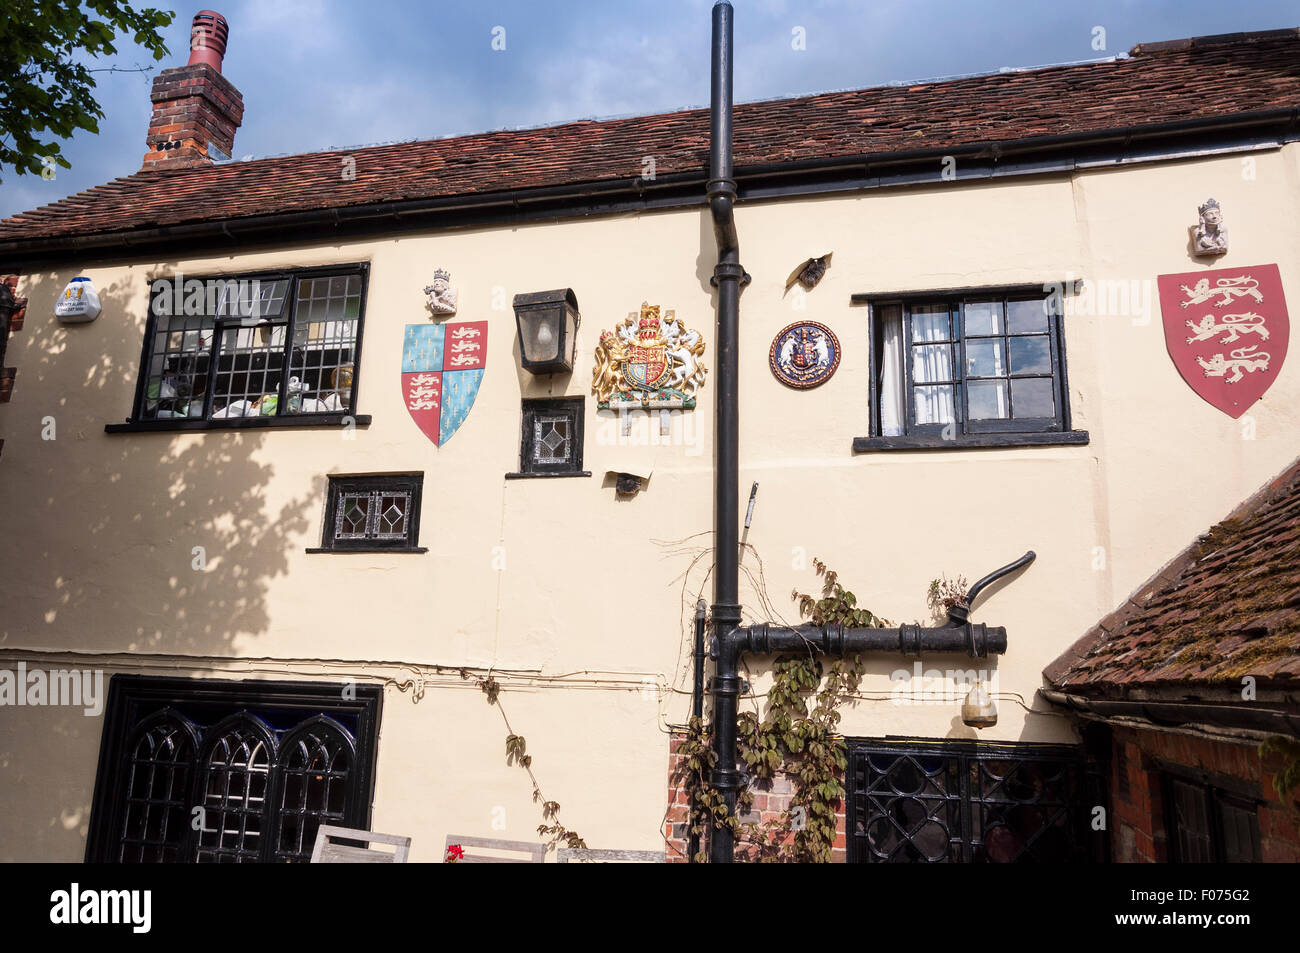 Coat of arms on wall of 'The Royal Standard of England' pub, Forty Green, Beaconsfield, Buckinghamshire, England, United Kingdom Stock Photo